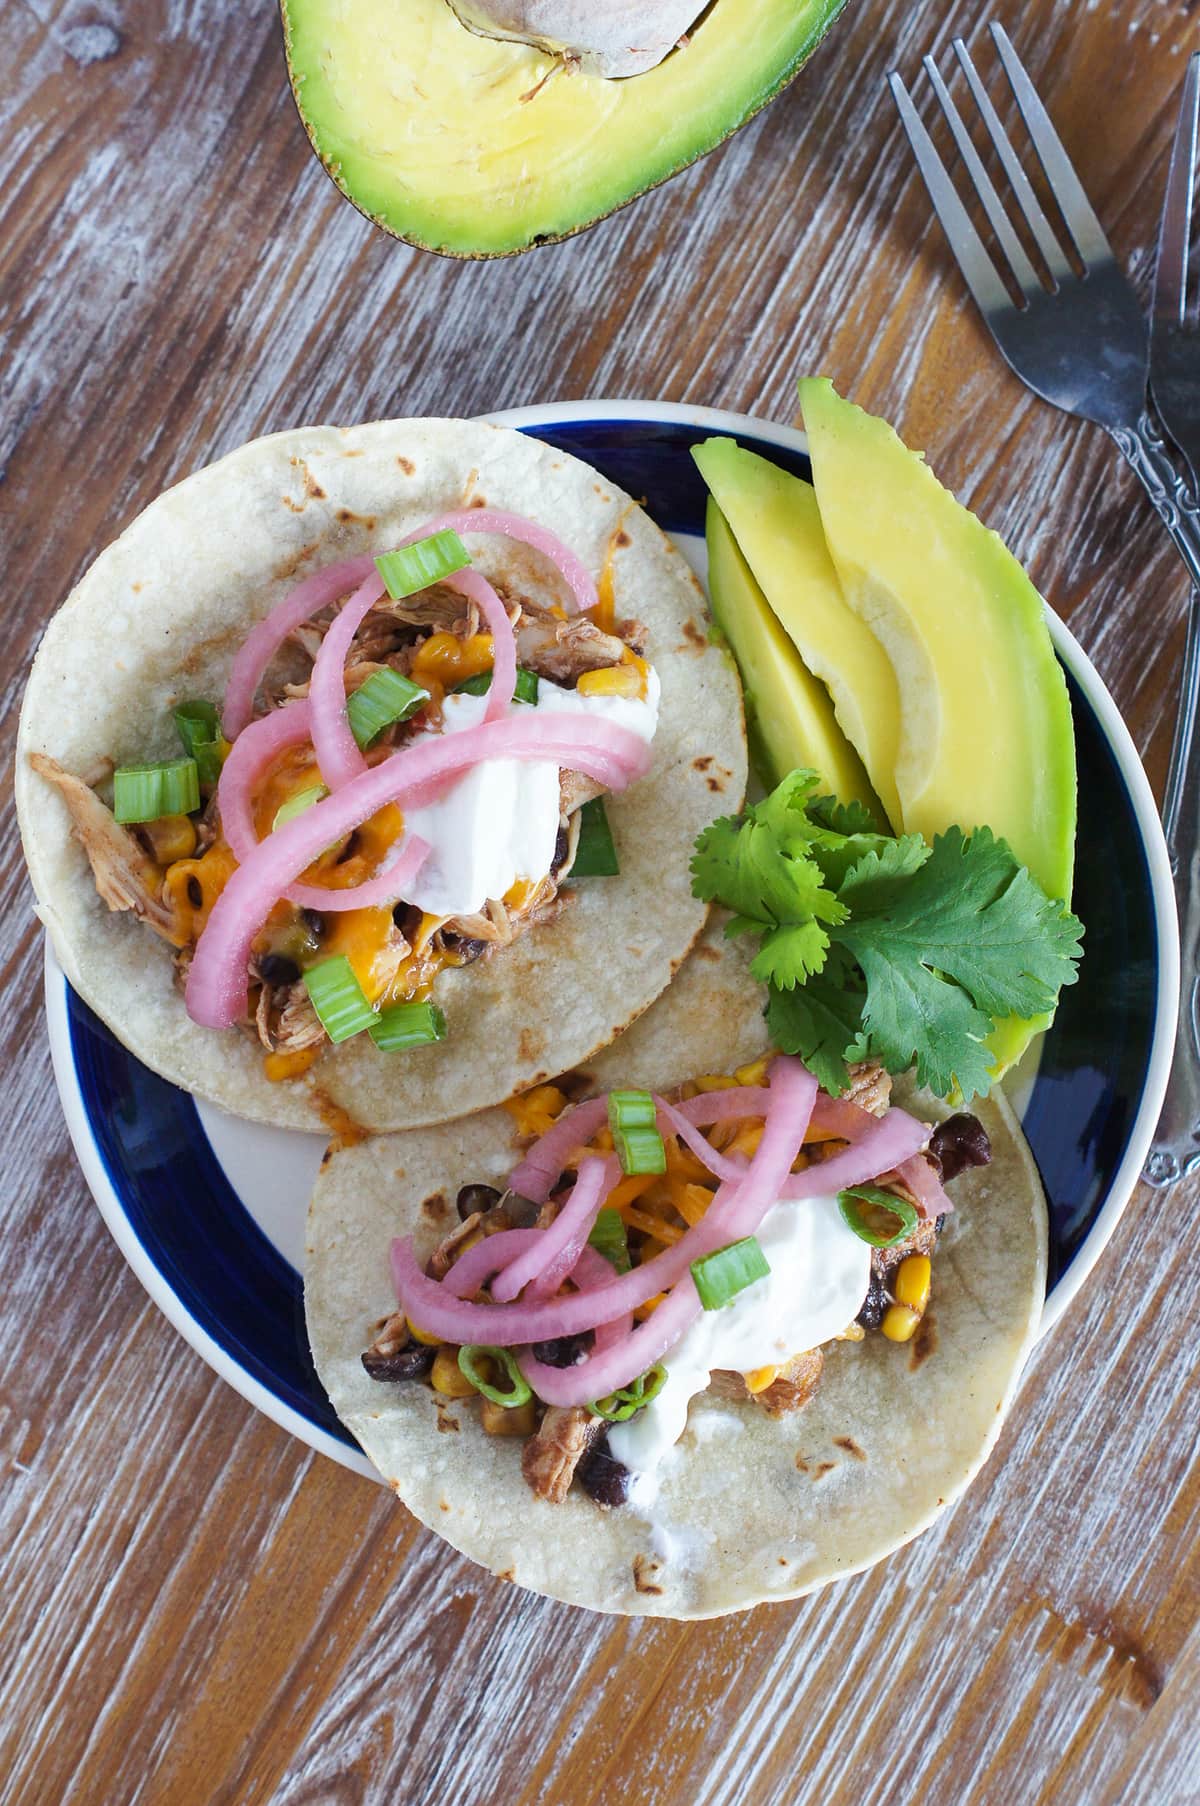 Chicken Chili Tacos ~ The easiest, quickest and most flavorful tacos made with the best leftover slow cooker chicken chili, corn tortillas, avocados, pickled onions and sour cream. 